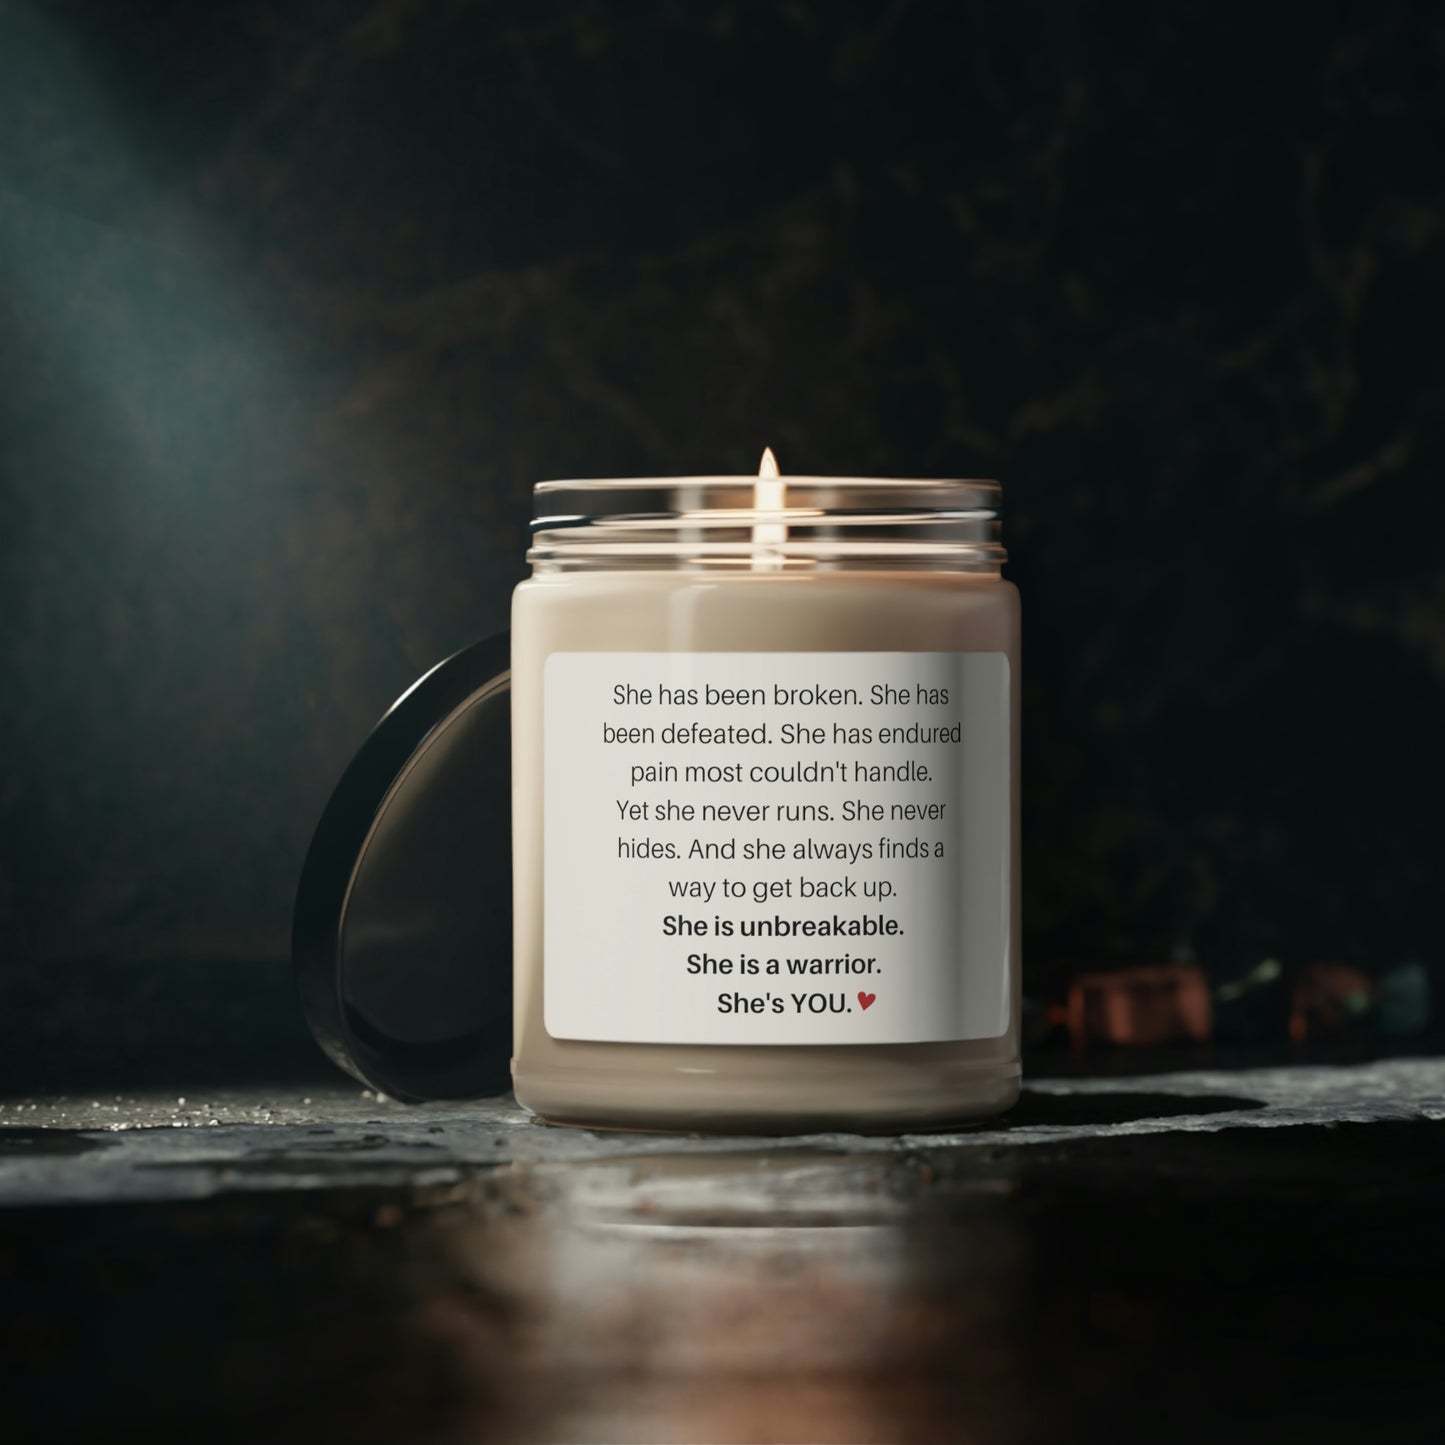 She Is You  ! ~ Scented Soy Candle, 9oz